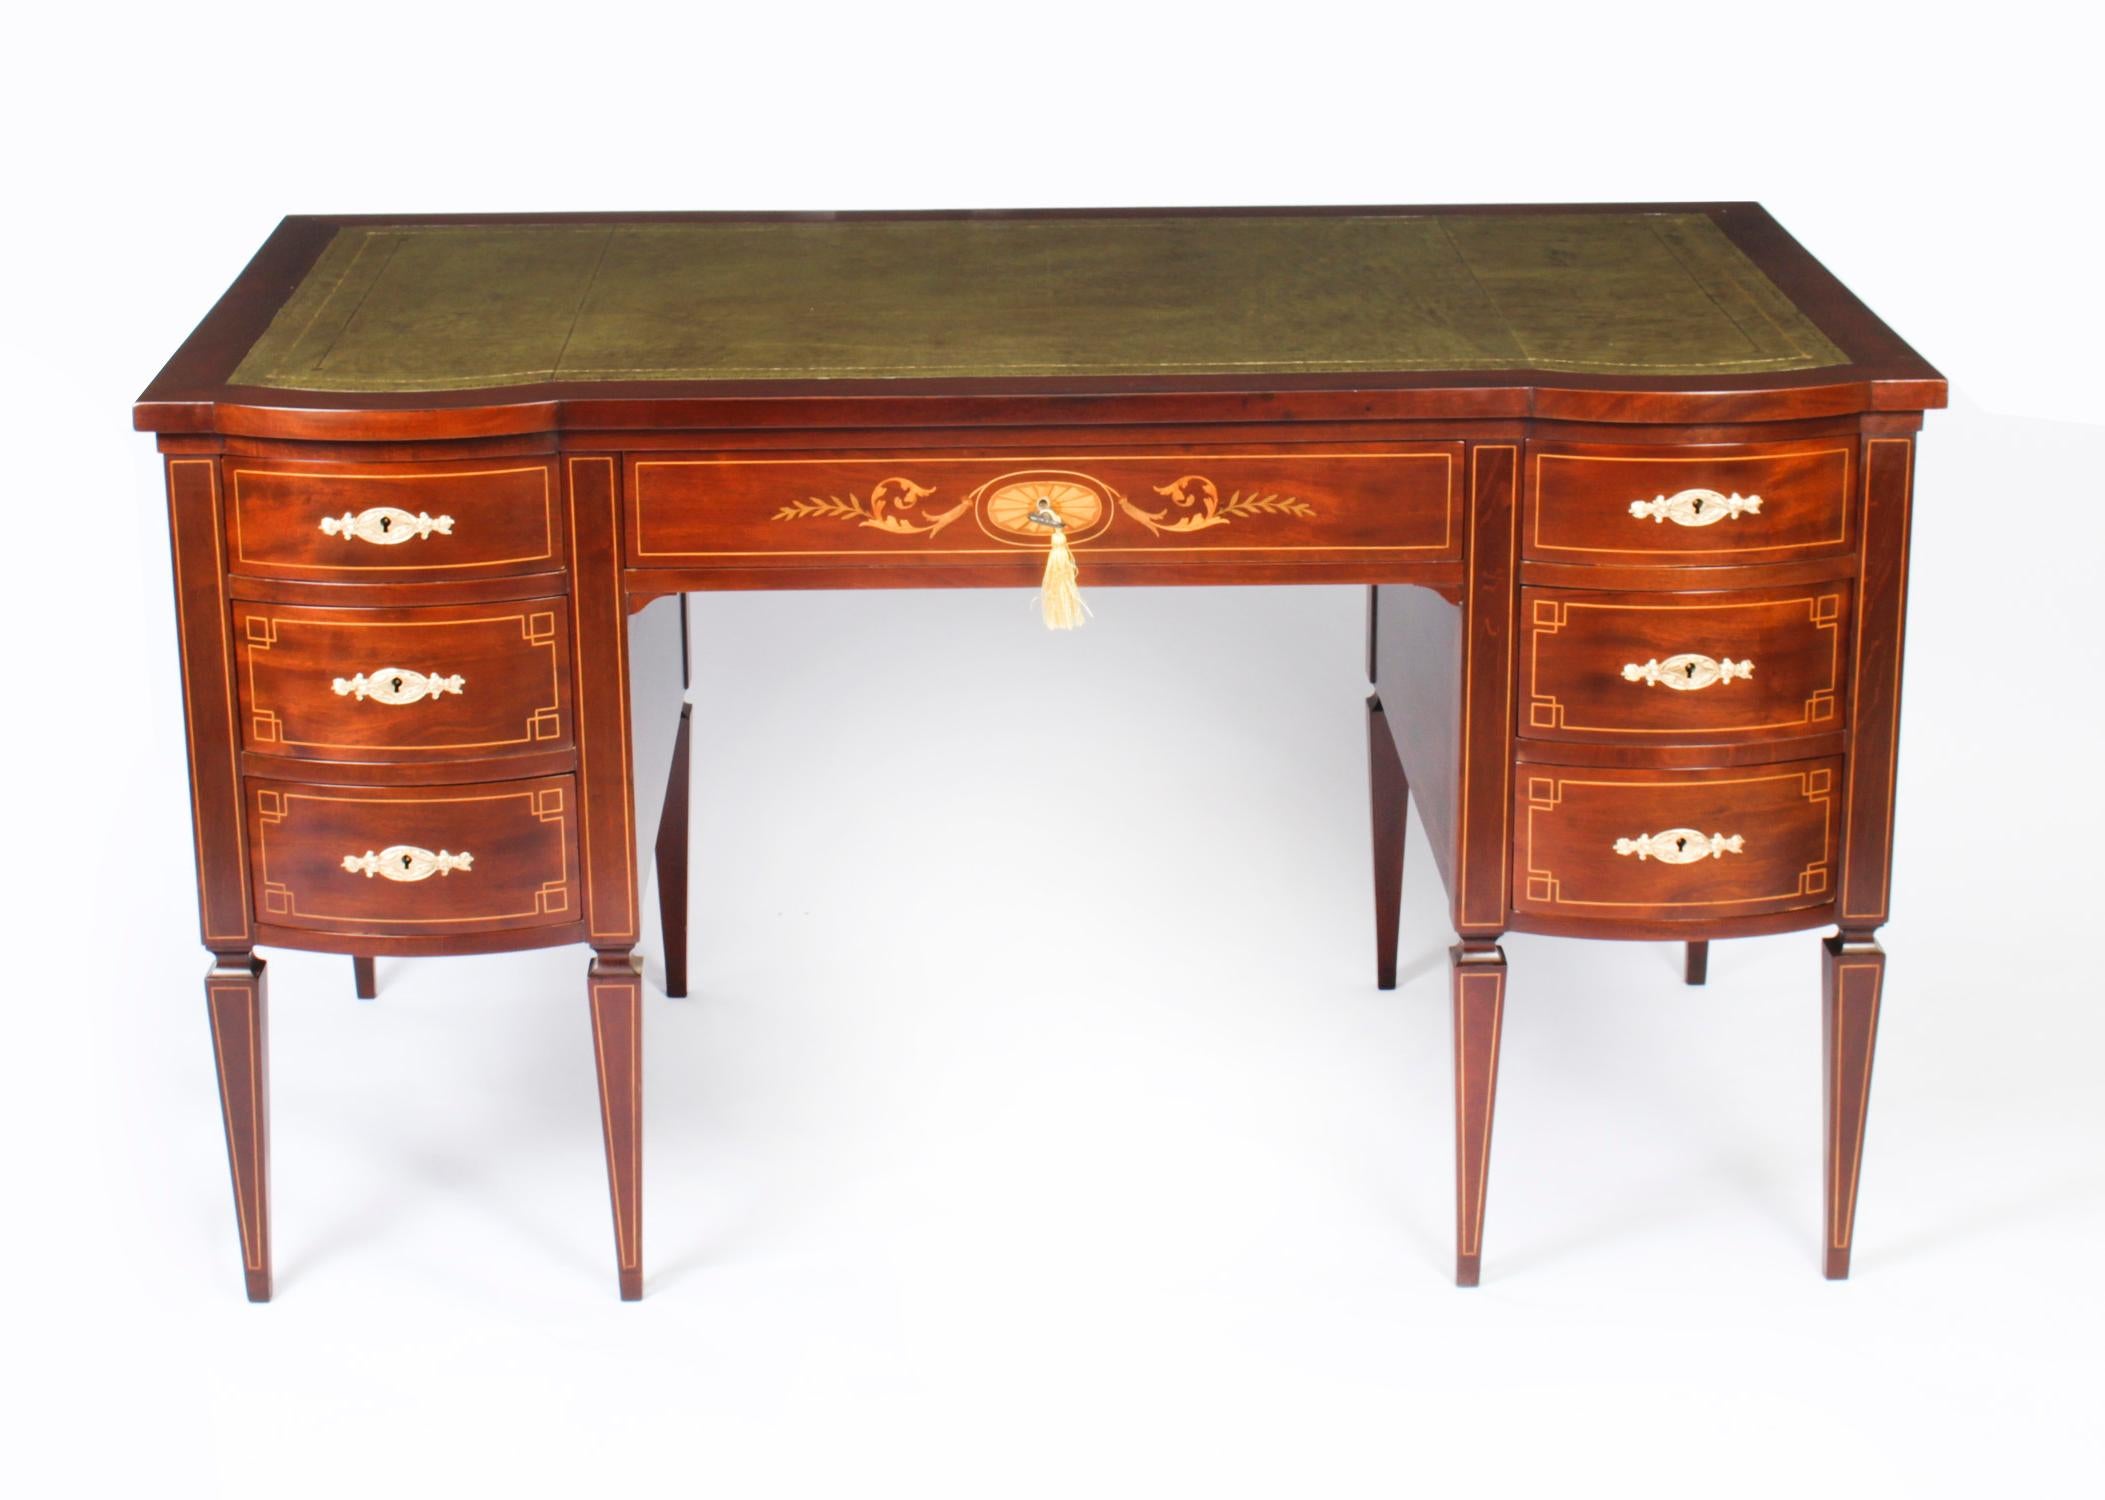 This is a stunning antique Edwardian writing desk, circa 1890 in date and in the manner of the renowned retailer and cabinet maker Edwards & Roberts.

It is made of solid mahogany and has fabulous inlaid decoration, the central frieze drawer with